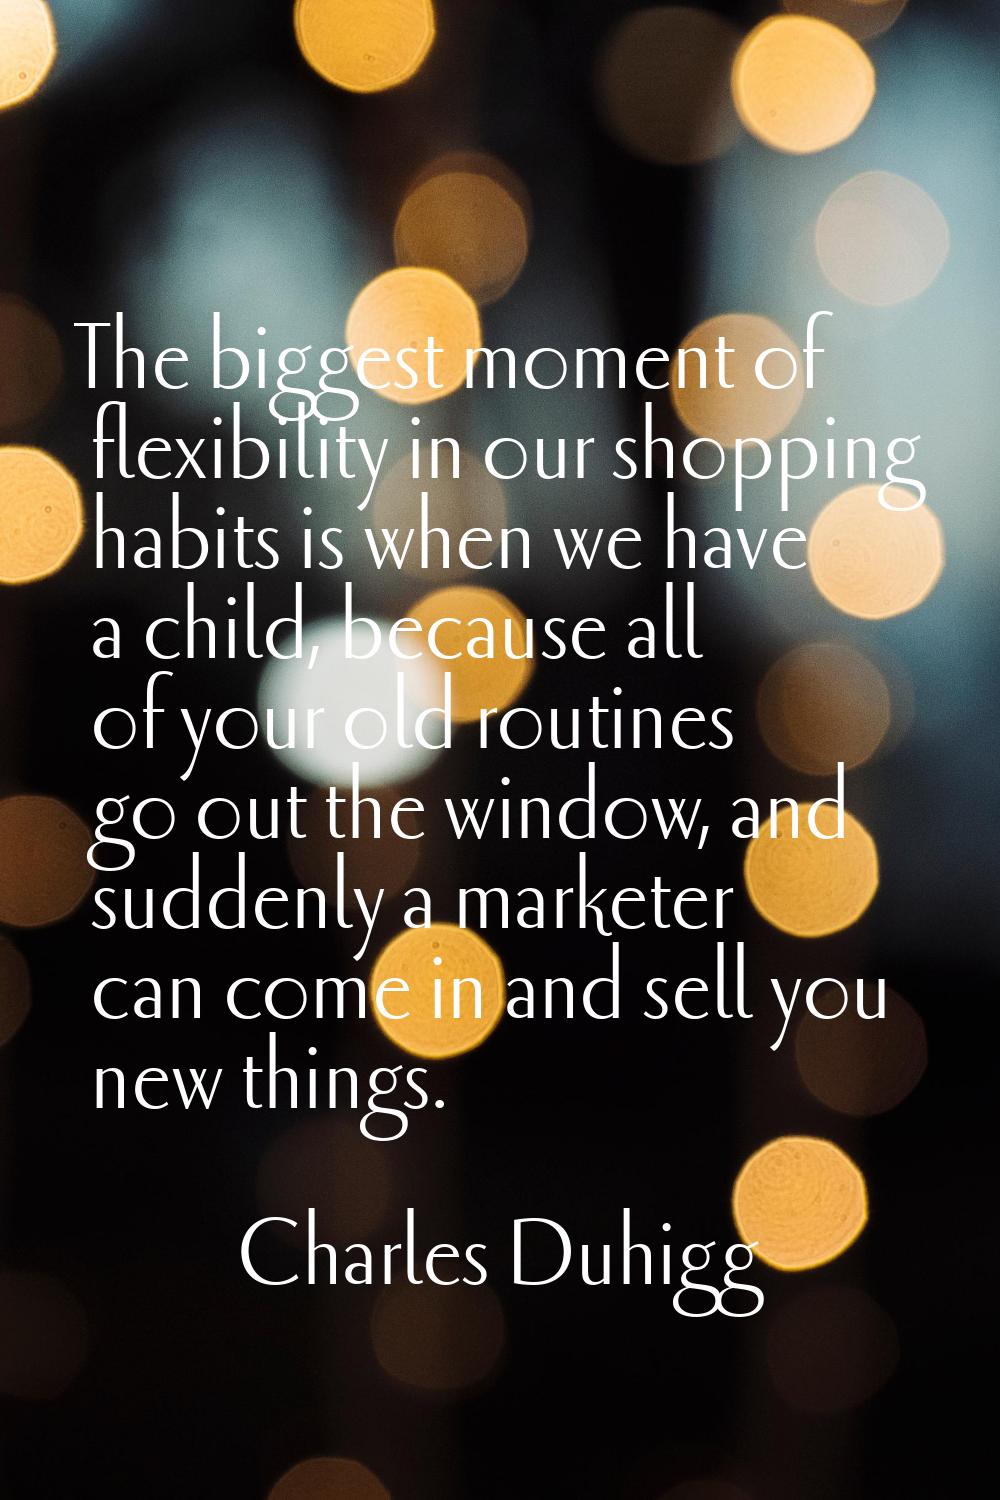 The biggest moment of flexibility in our shopping habits is when we have a child, because all of yo